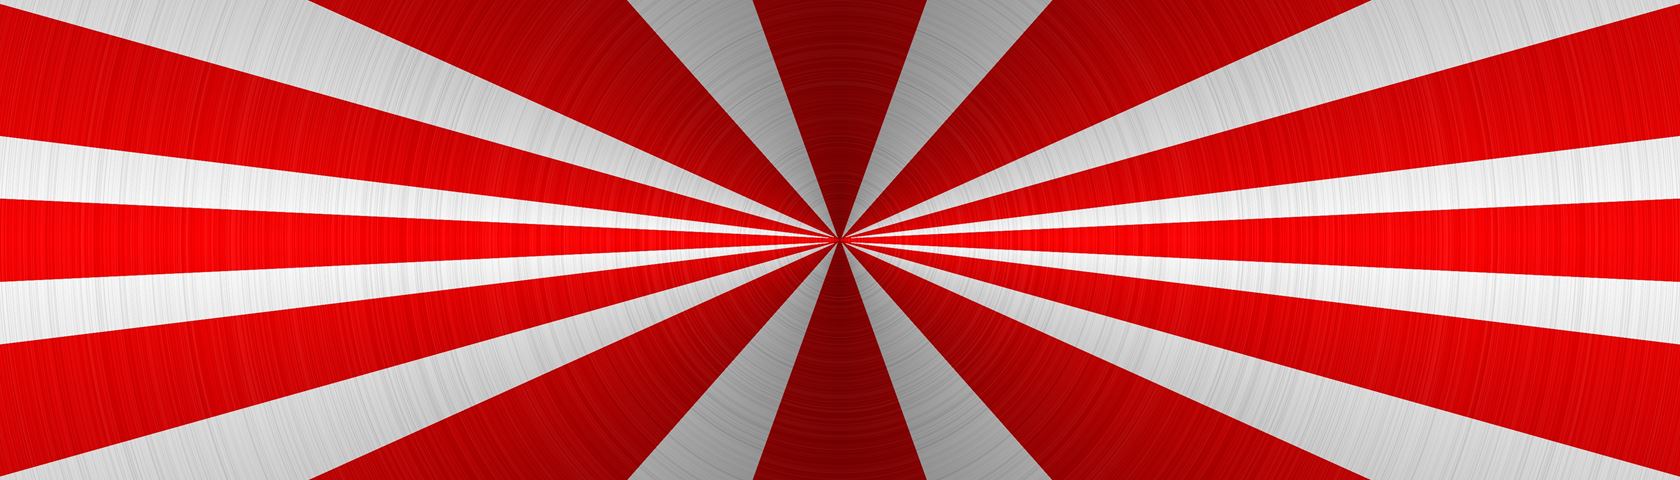 Japanese Rising Sun Inspired Wallpaper • Image • WallpaperFusion by Binary Fortress Software